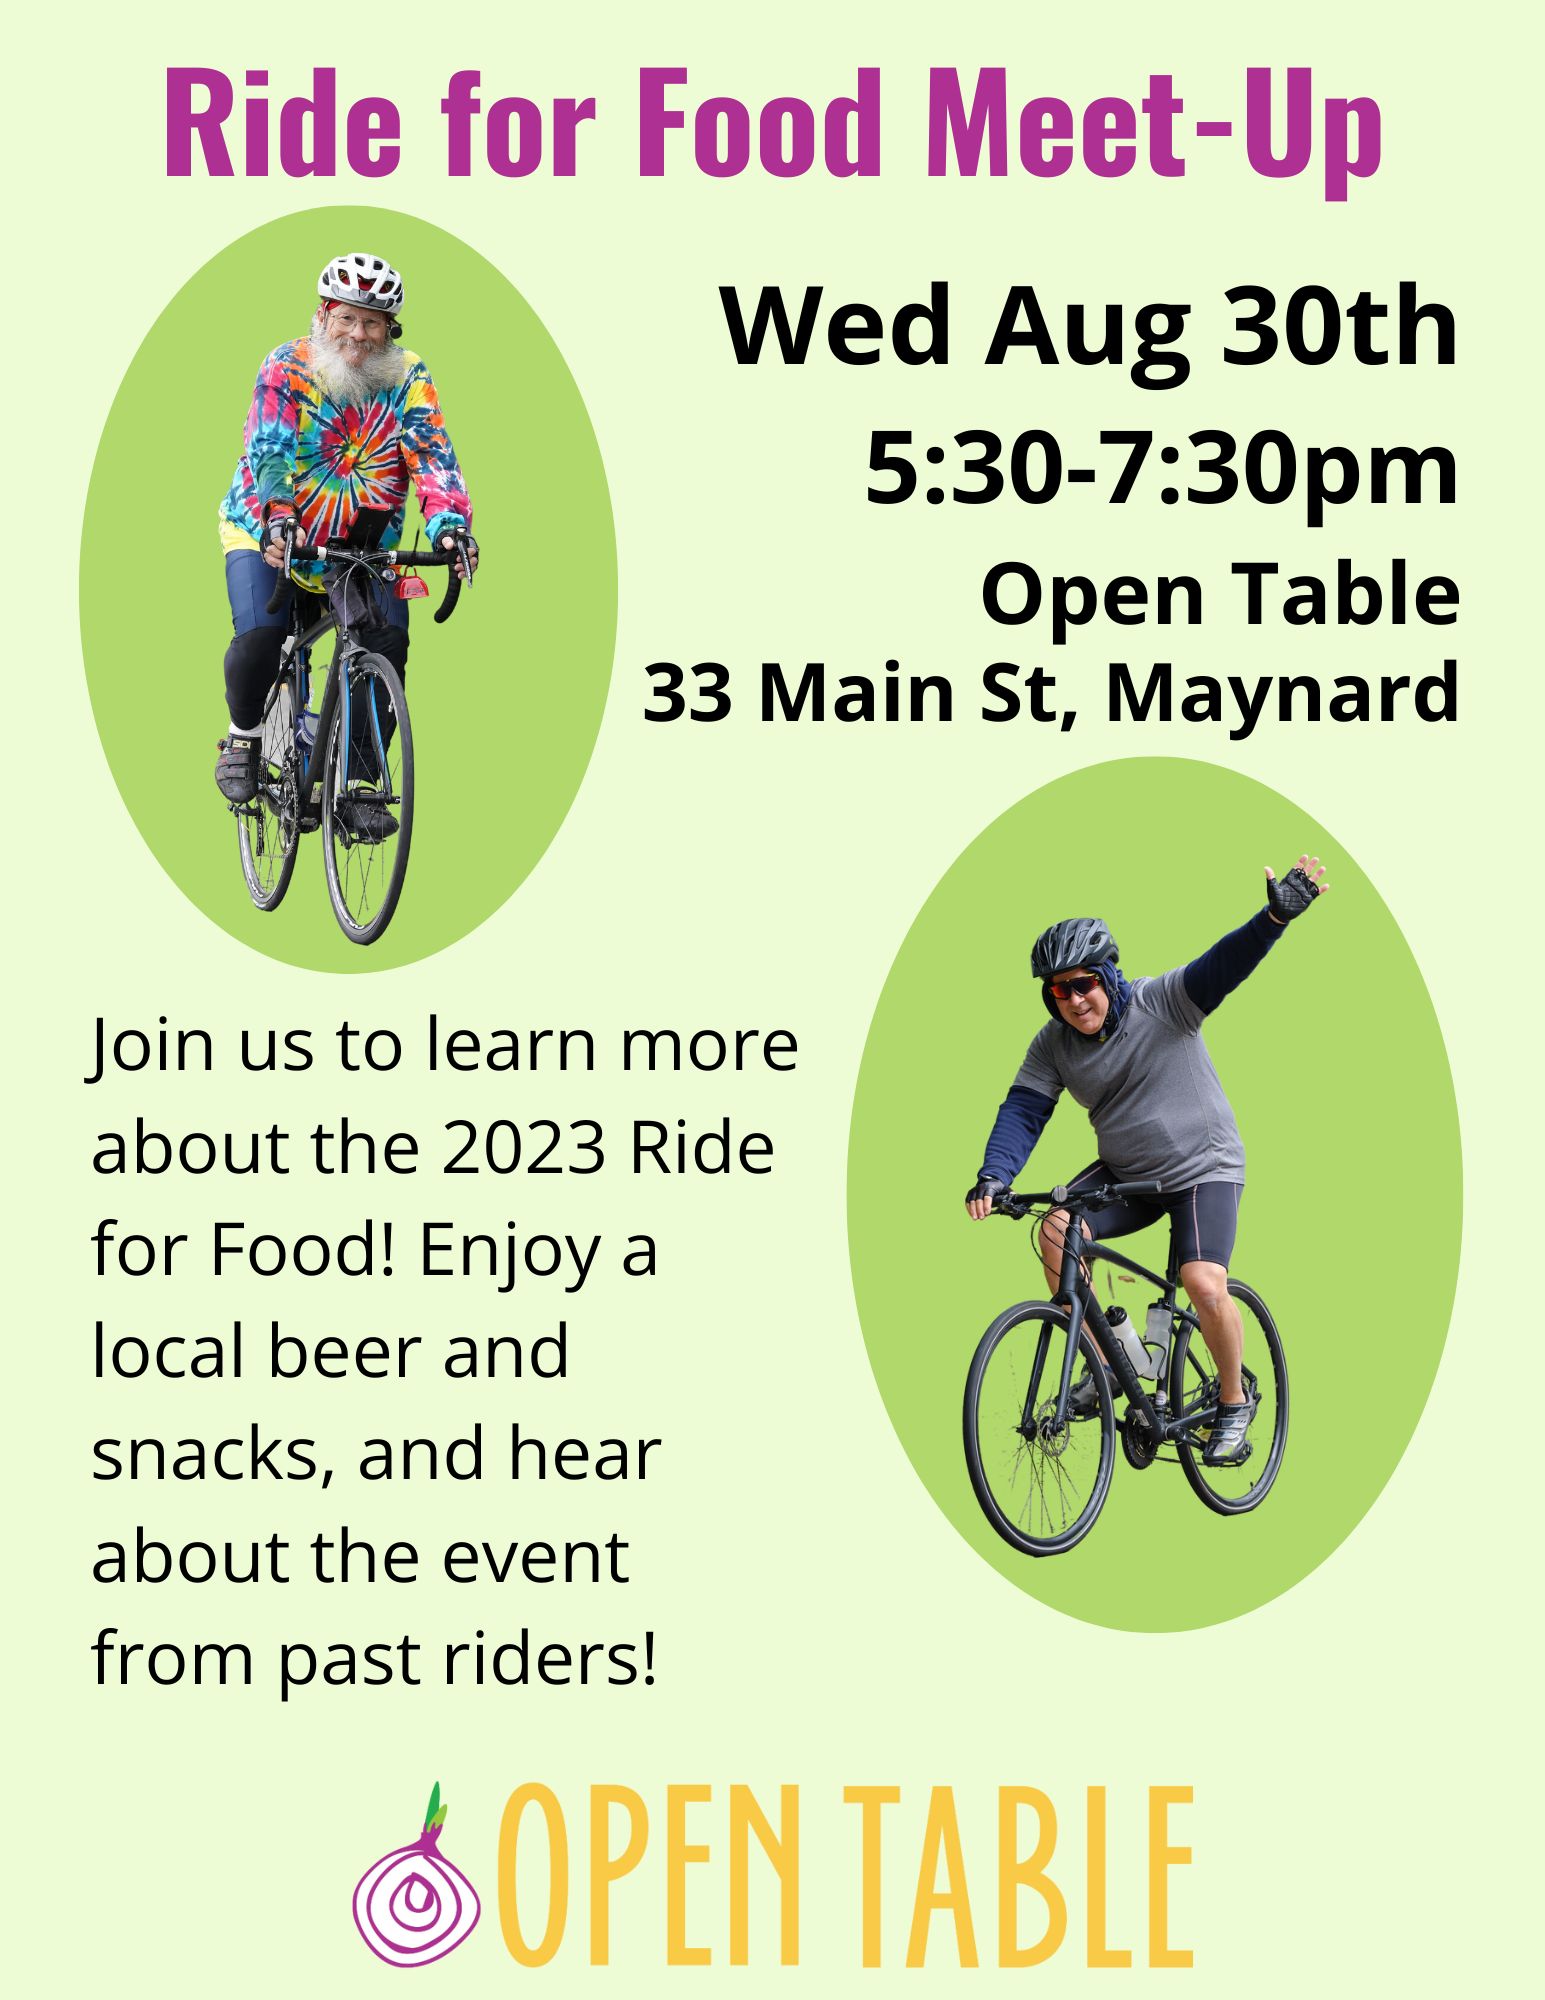 Ride for Food Meet-Up flyer